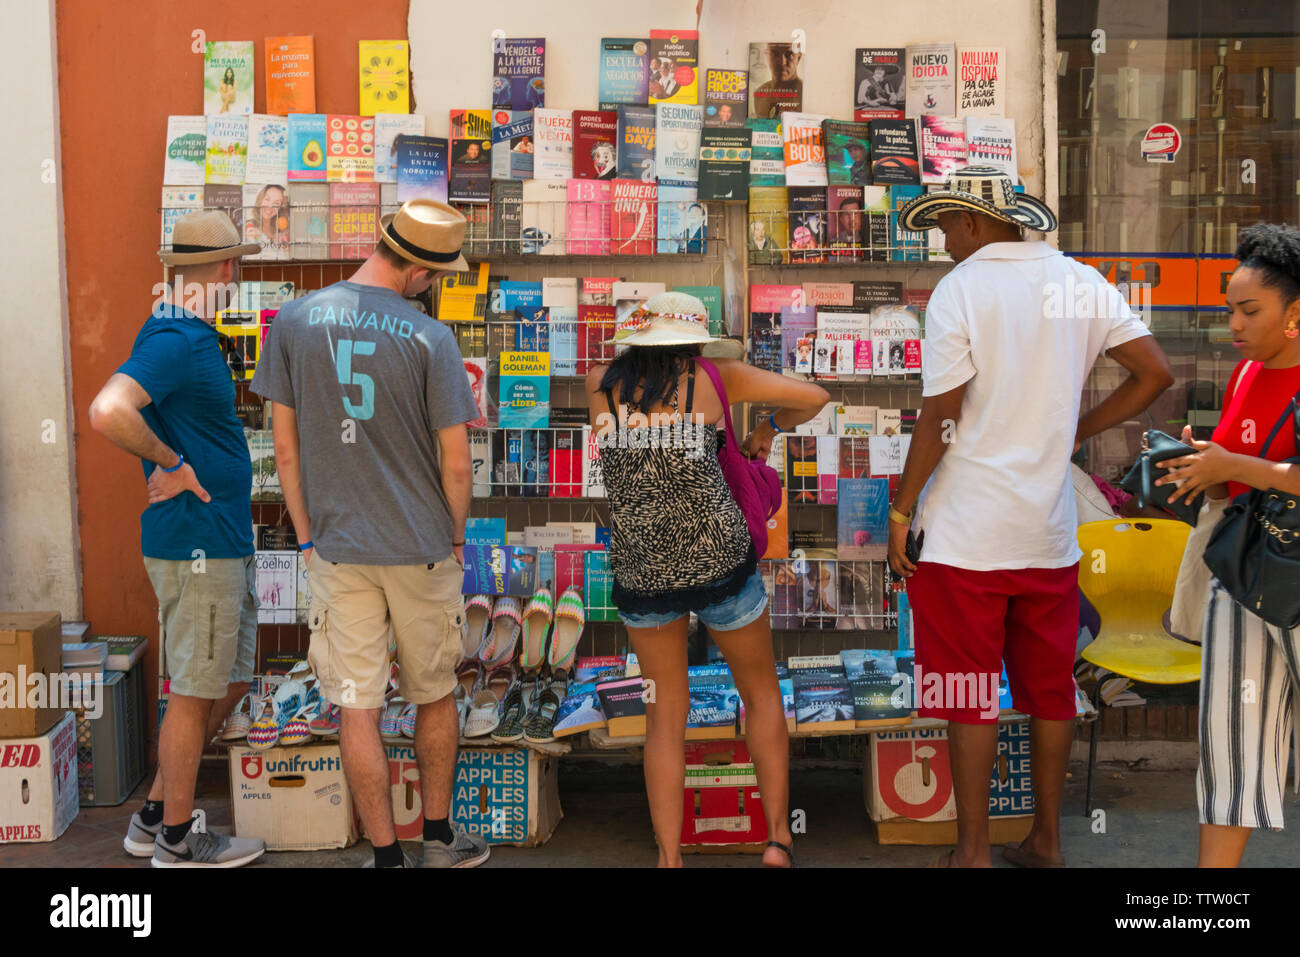 People looking at a booth selling books on the street, Cartagena, UNESCO World Heritage site, Bolivar Department, Colombia Stock Photo